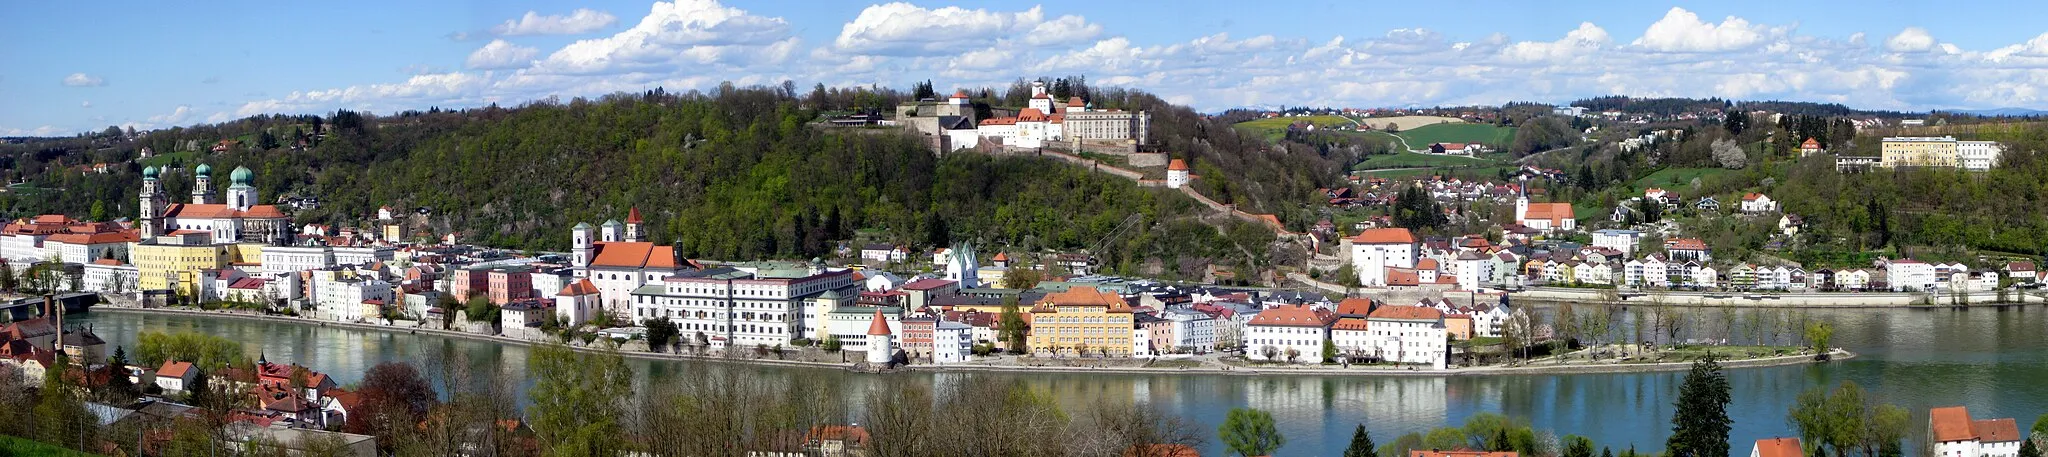 Photo showing: The Old Town of Passau